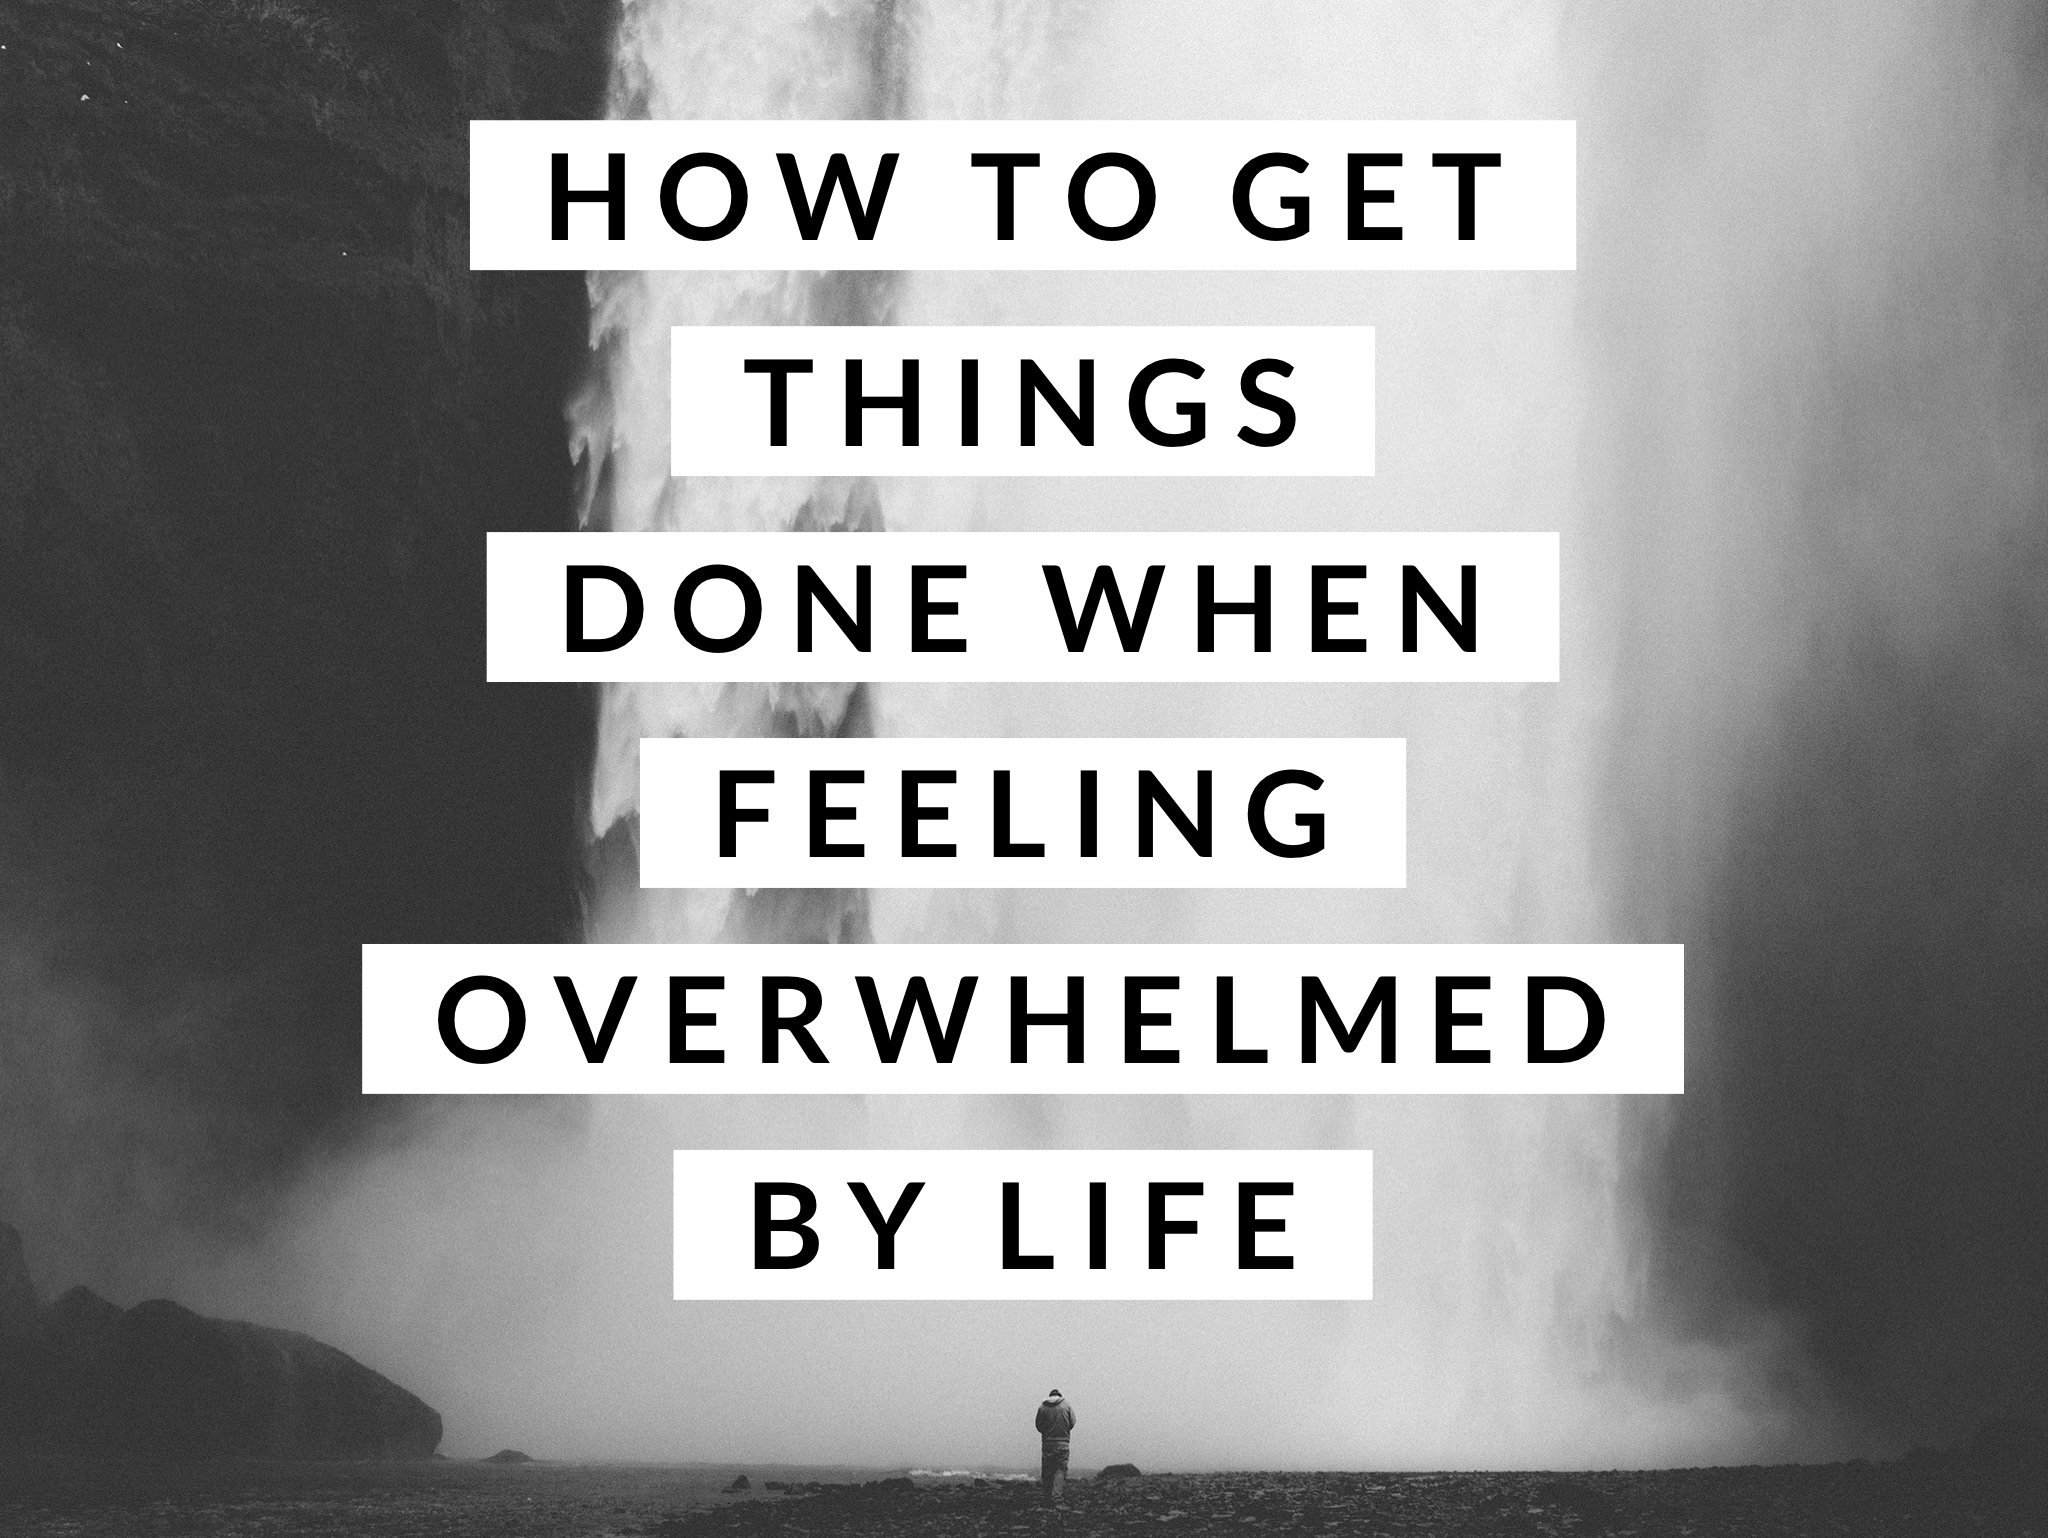 How To Get Things Done When Feeling Overwhelmed By Life